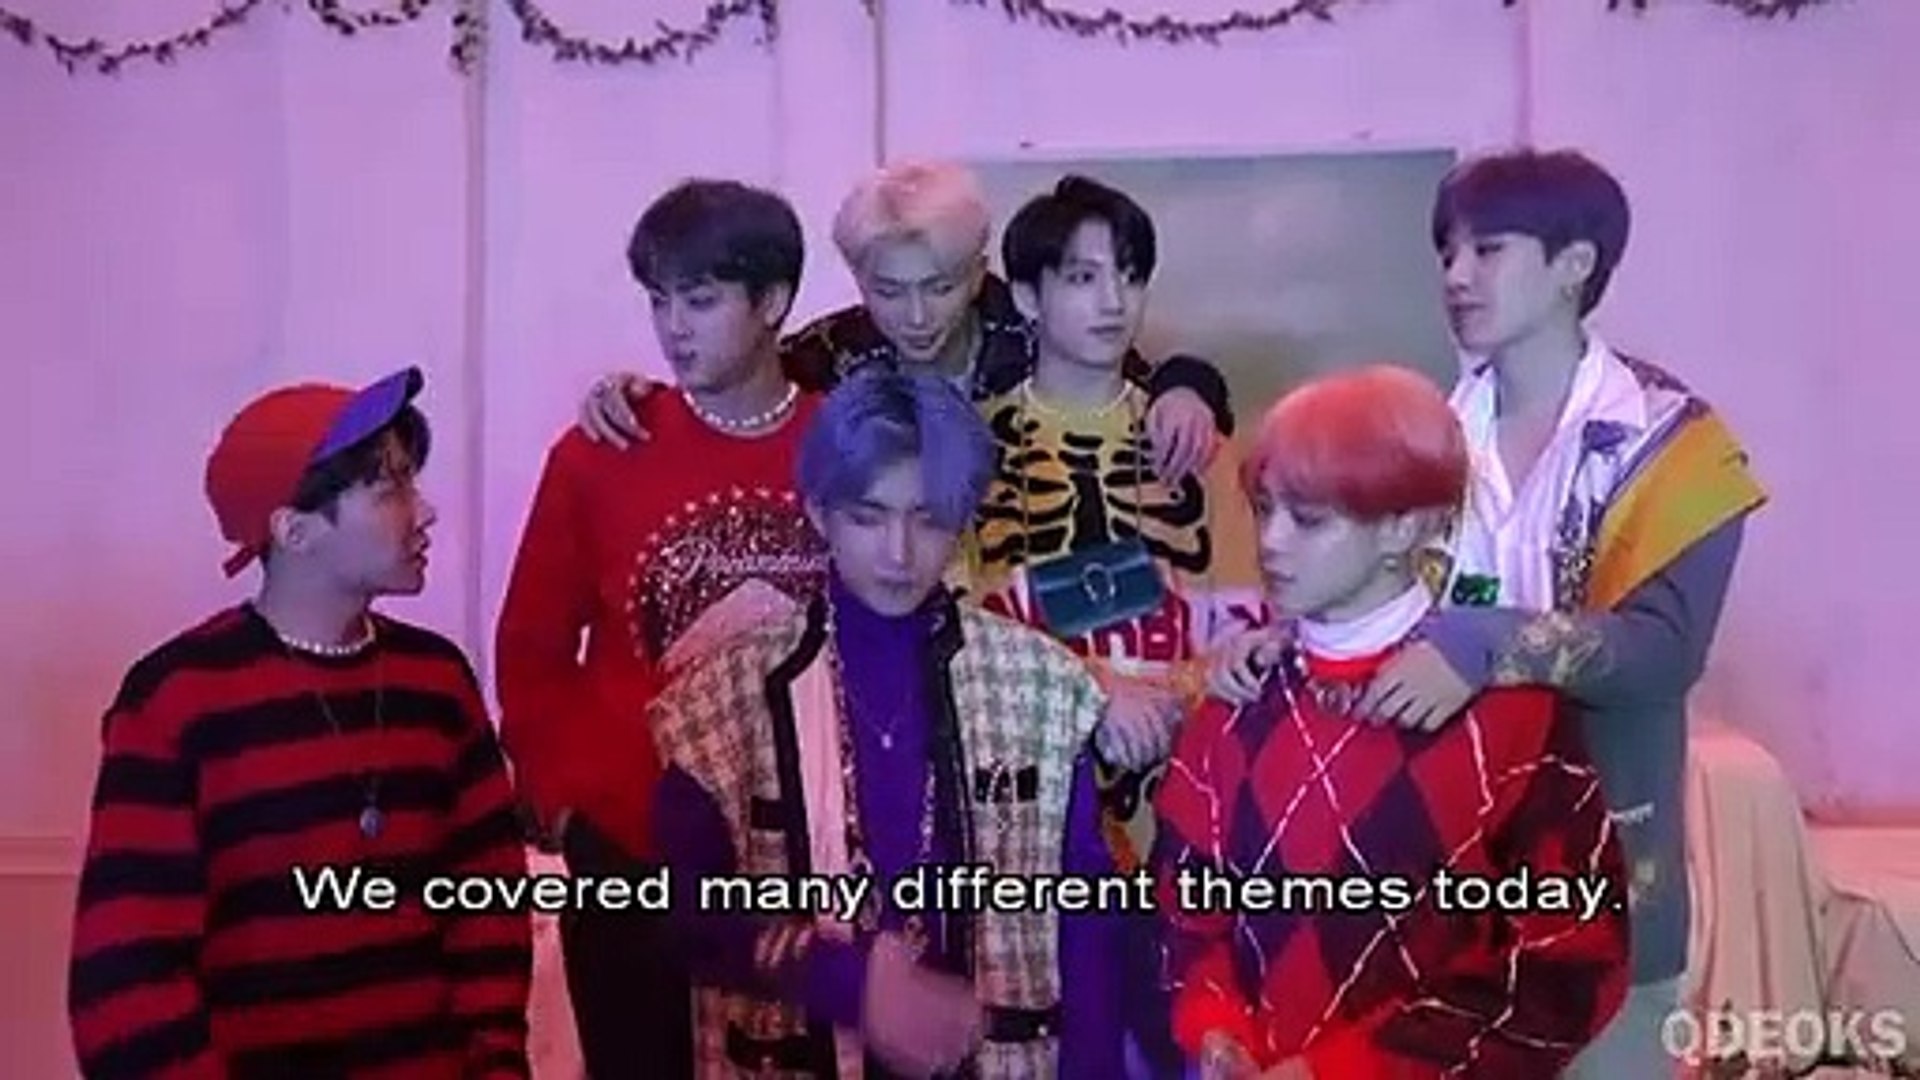 [ENG] BTS MEMORIES OF 2019 DVD (DISC 03) - 'MAP OF THE SOUL: PERSONA' ALBUM  JACKET MAKING FILM